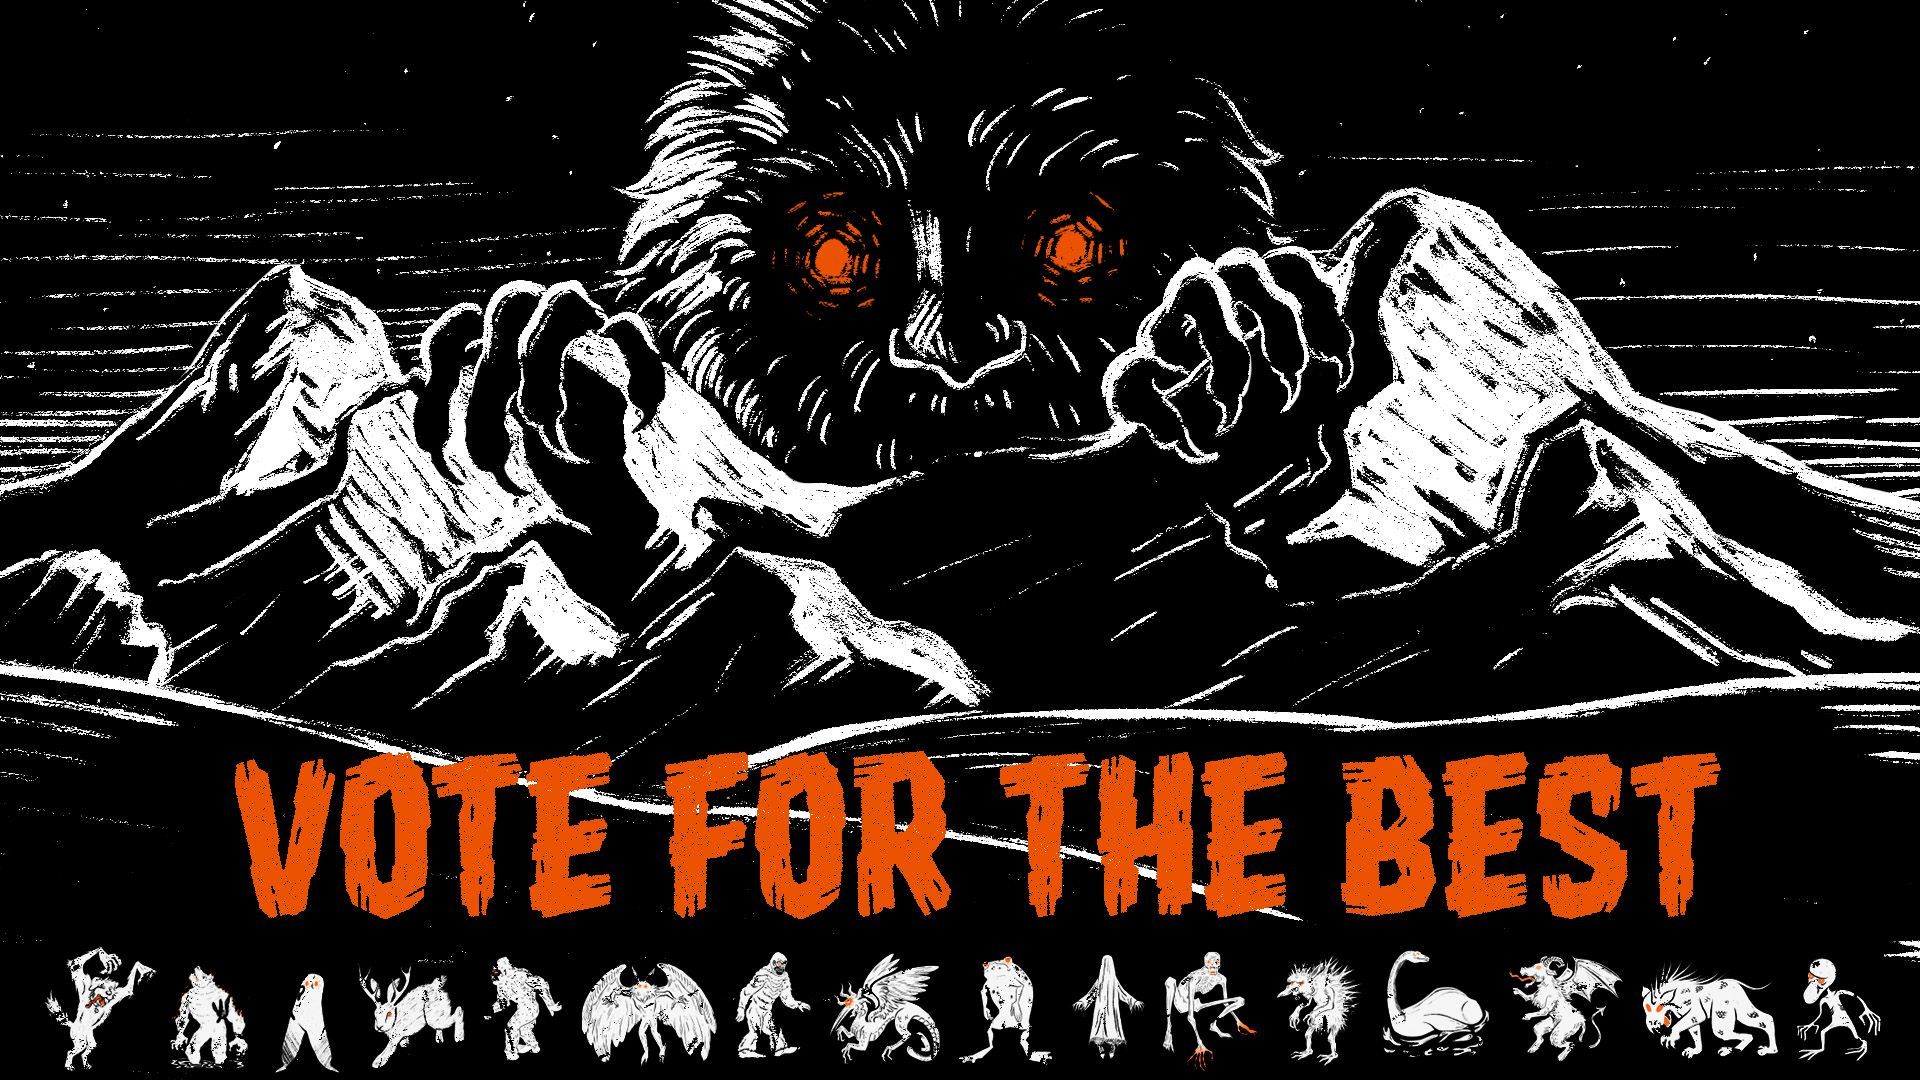 Illustration of a cryptid figure peeking out from behind a landscape and text that says "Vote for the best."